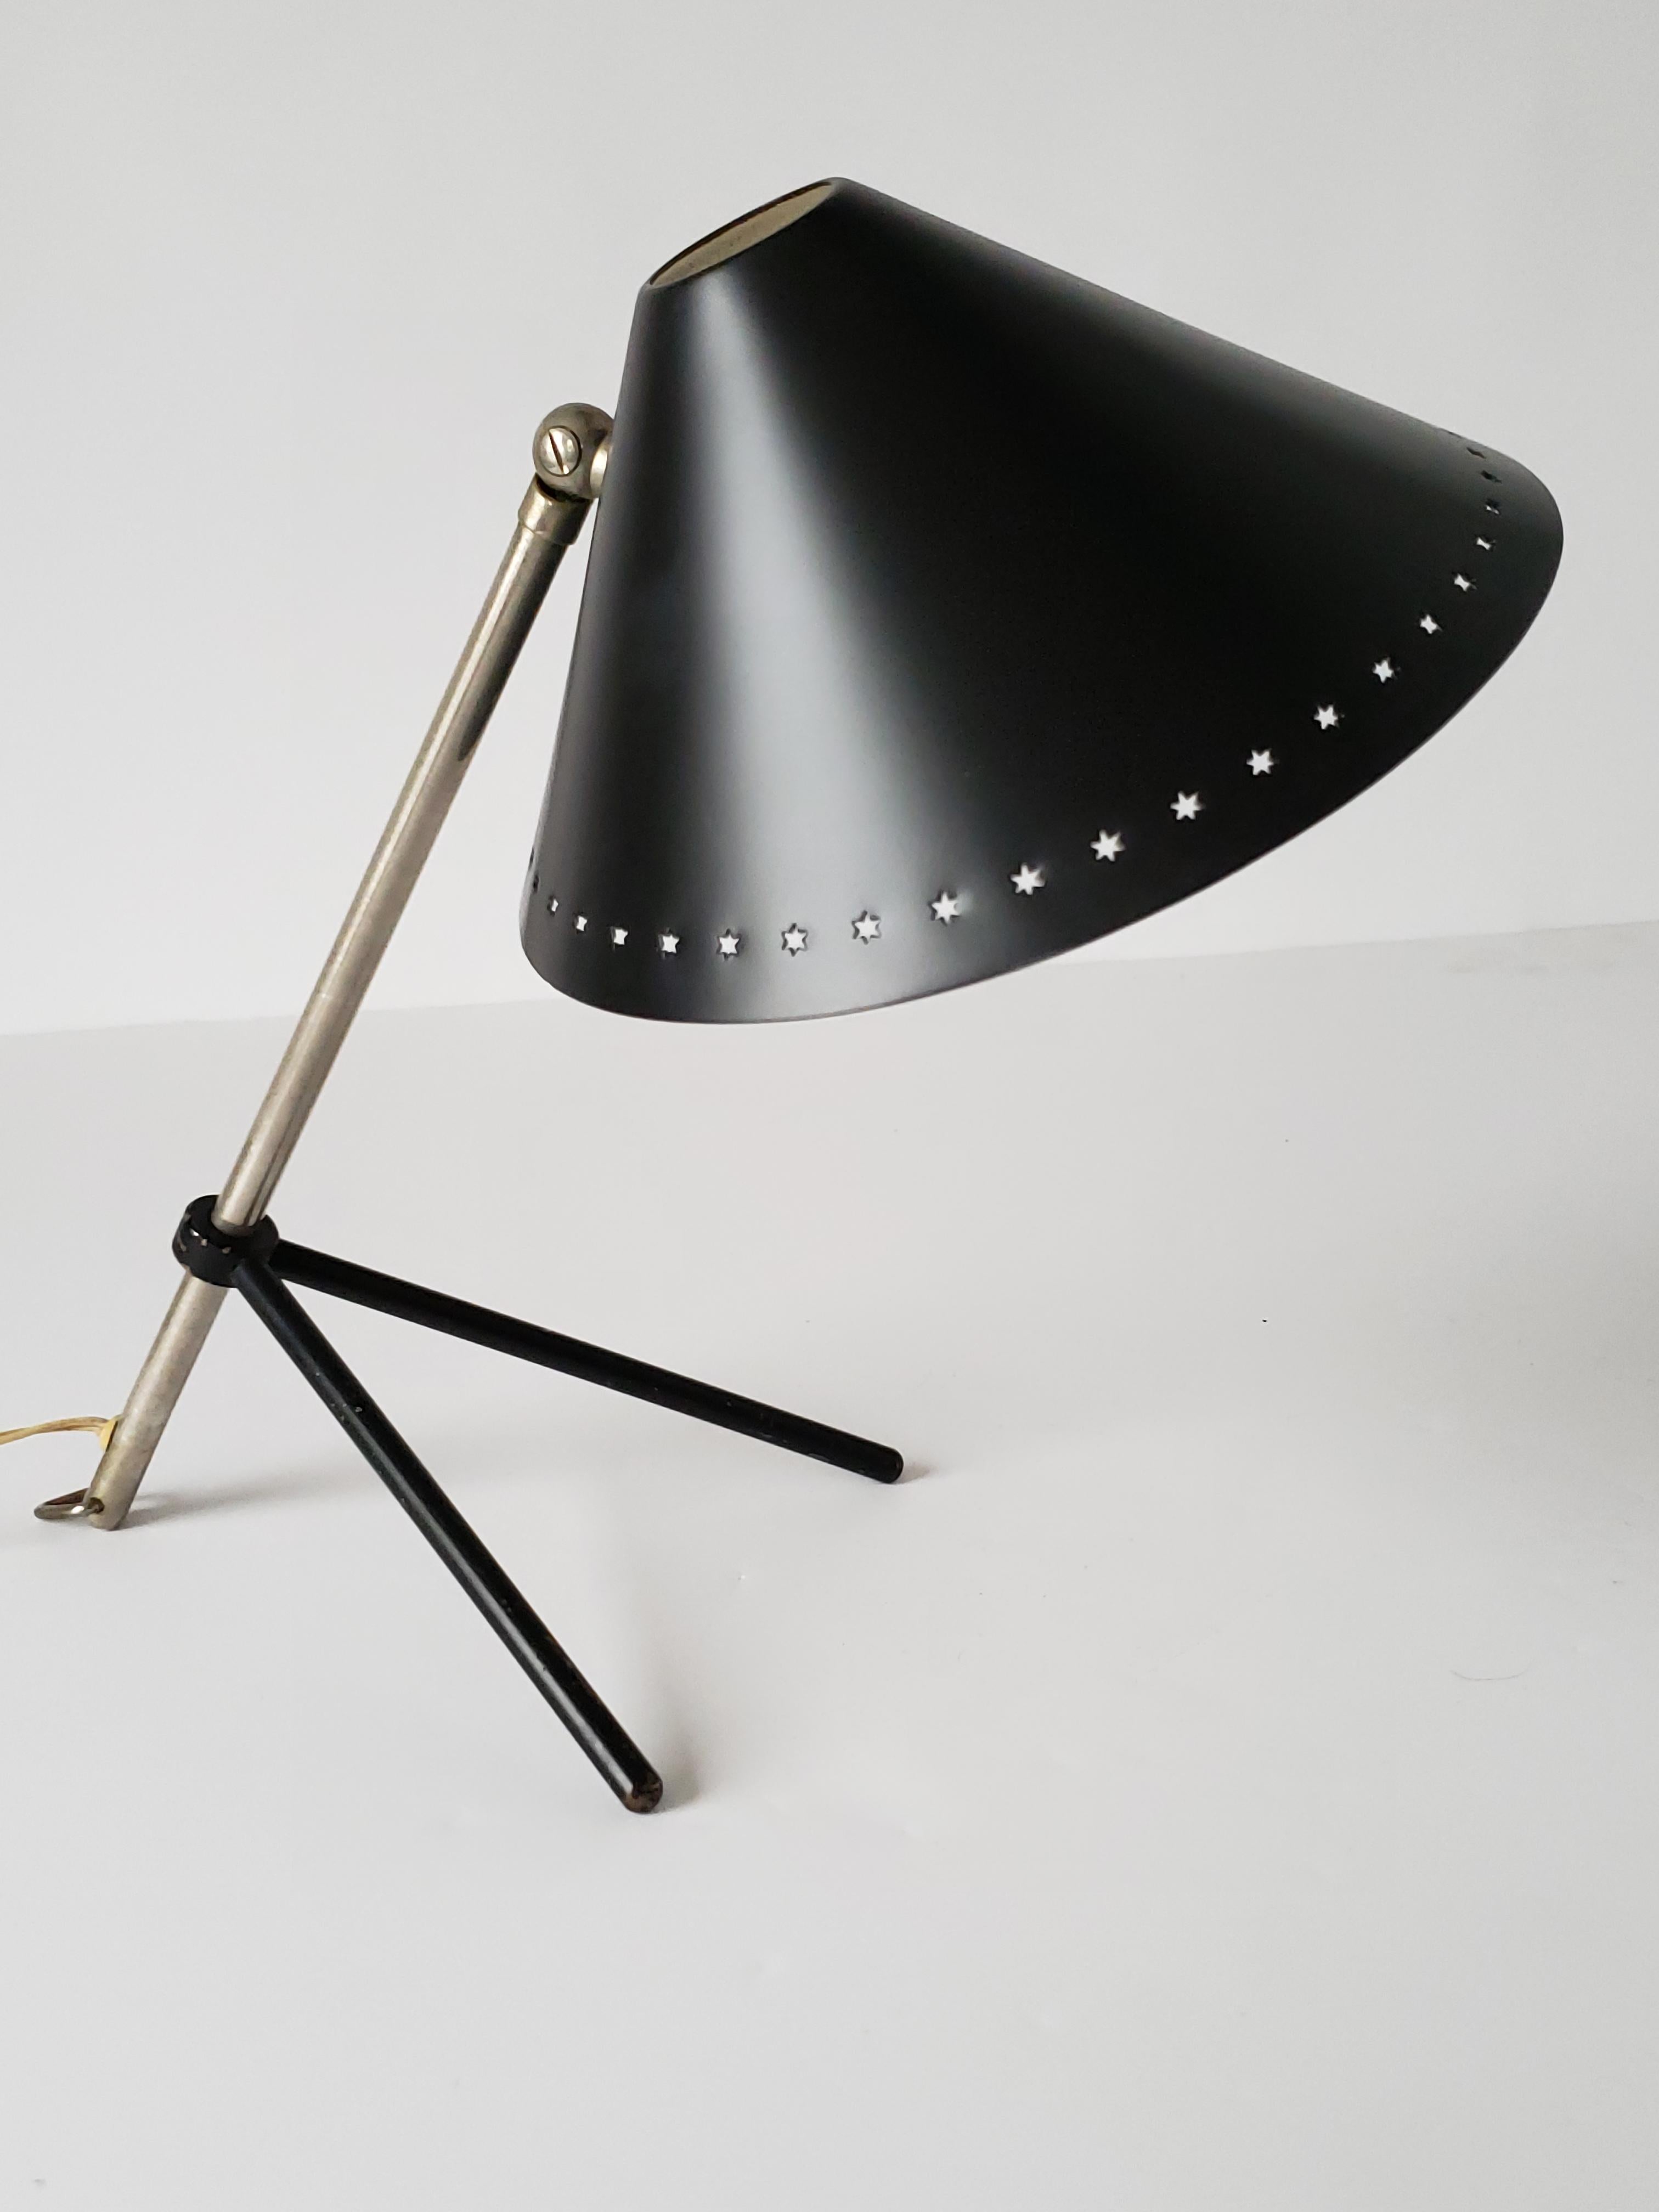 Enameled 1950s  'Pinocchio' Table or Wall Lamp by H. Busquet for Hala Zeist, Netherlands